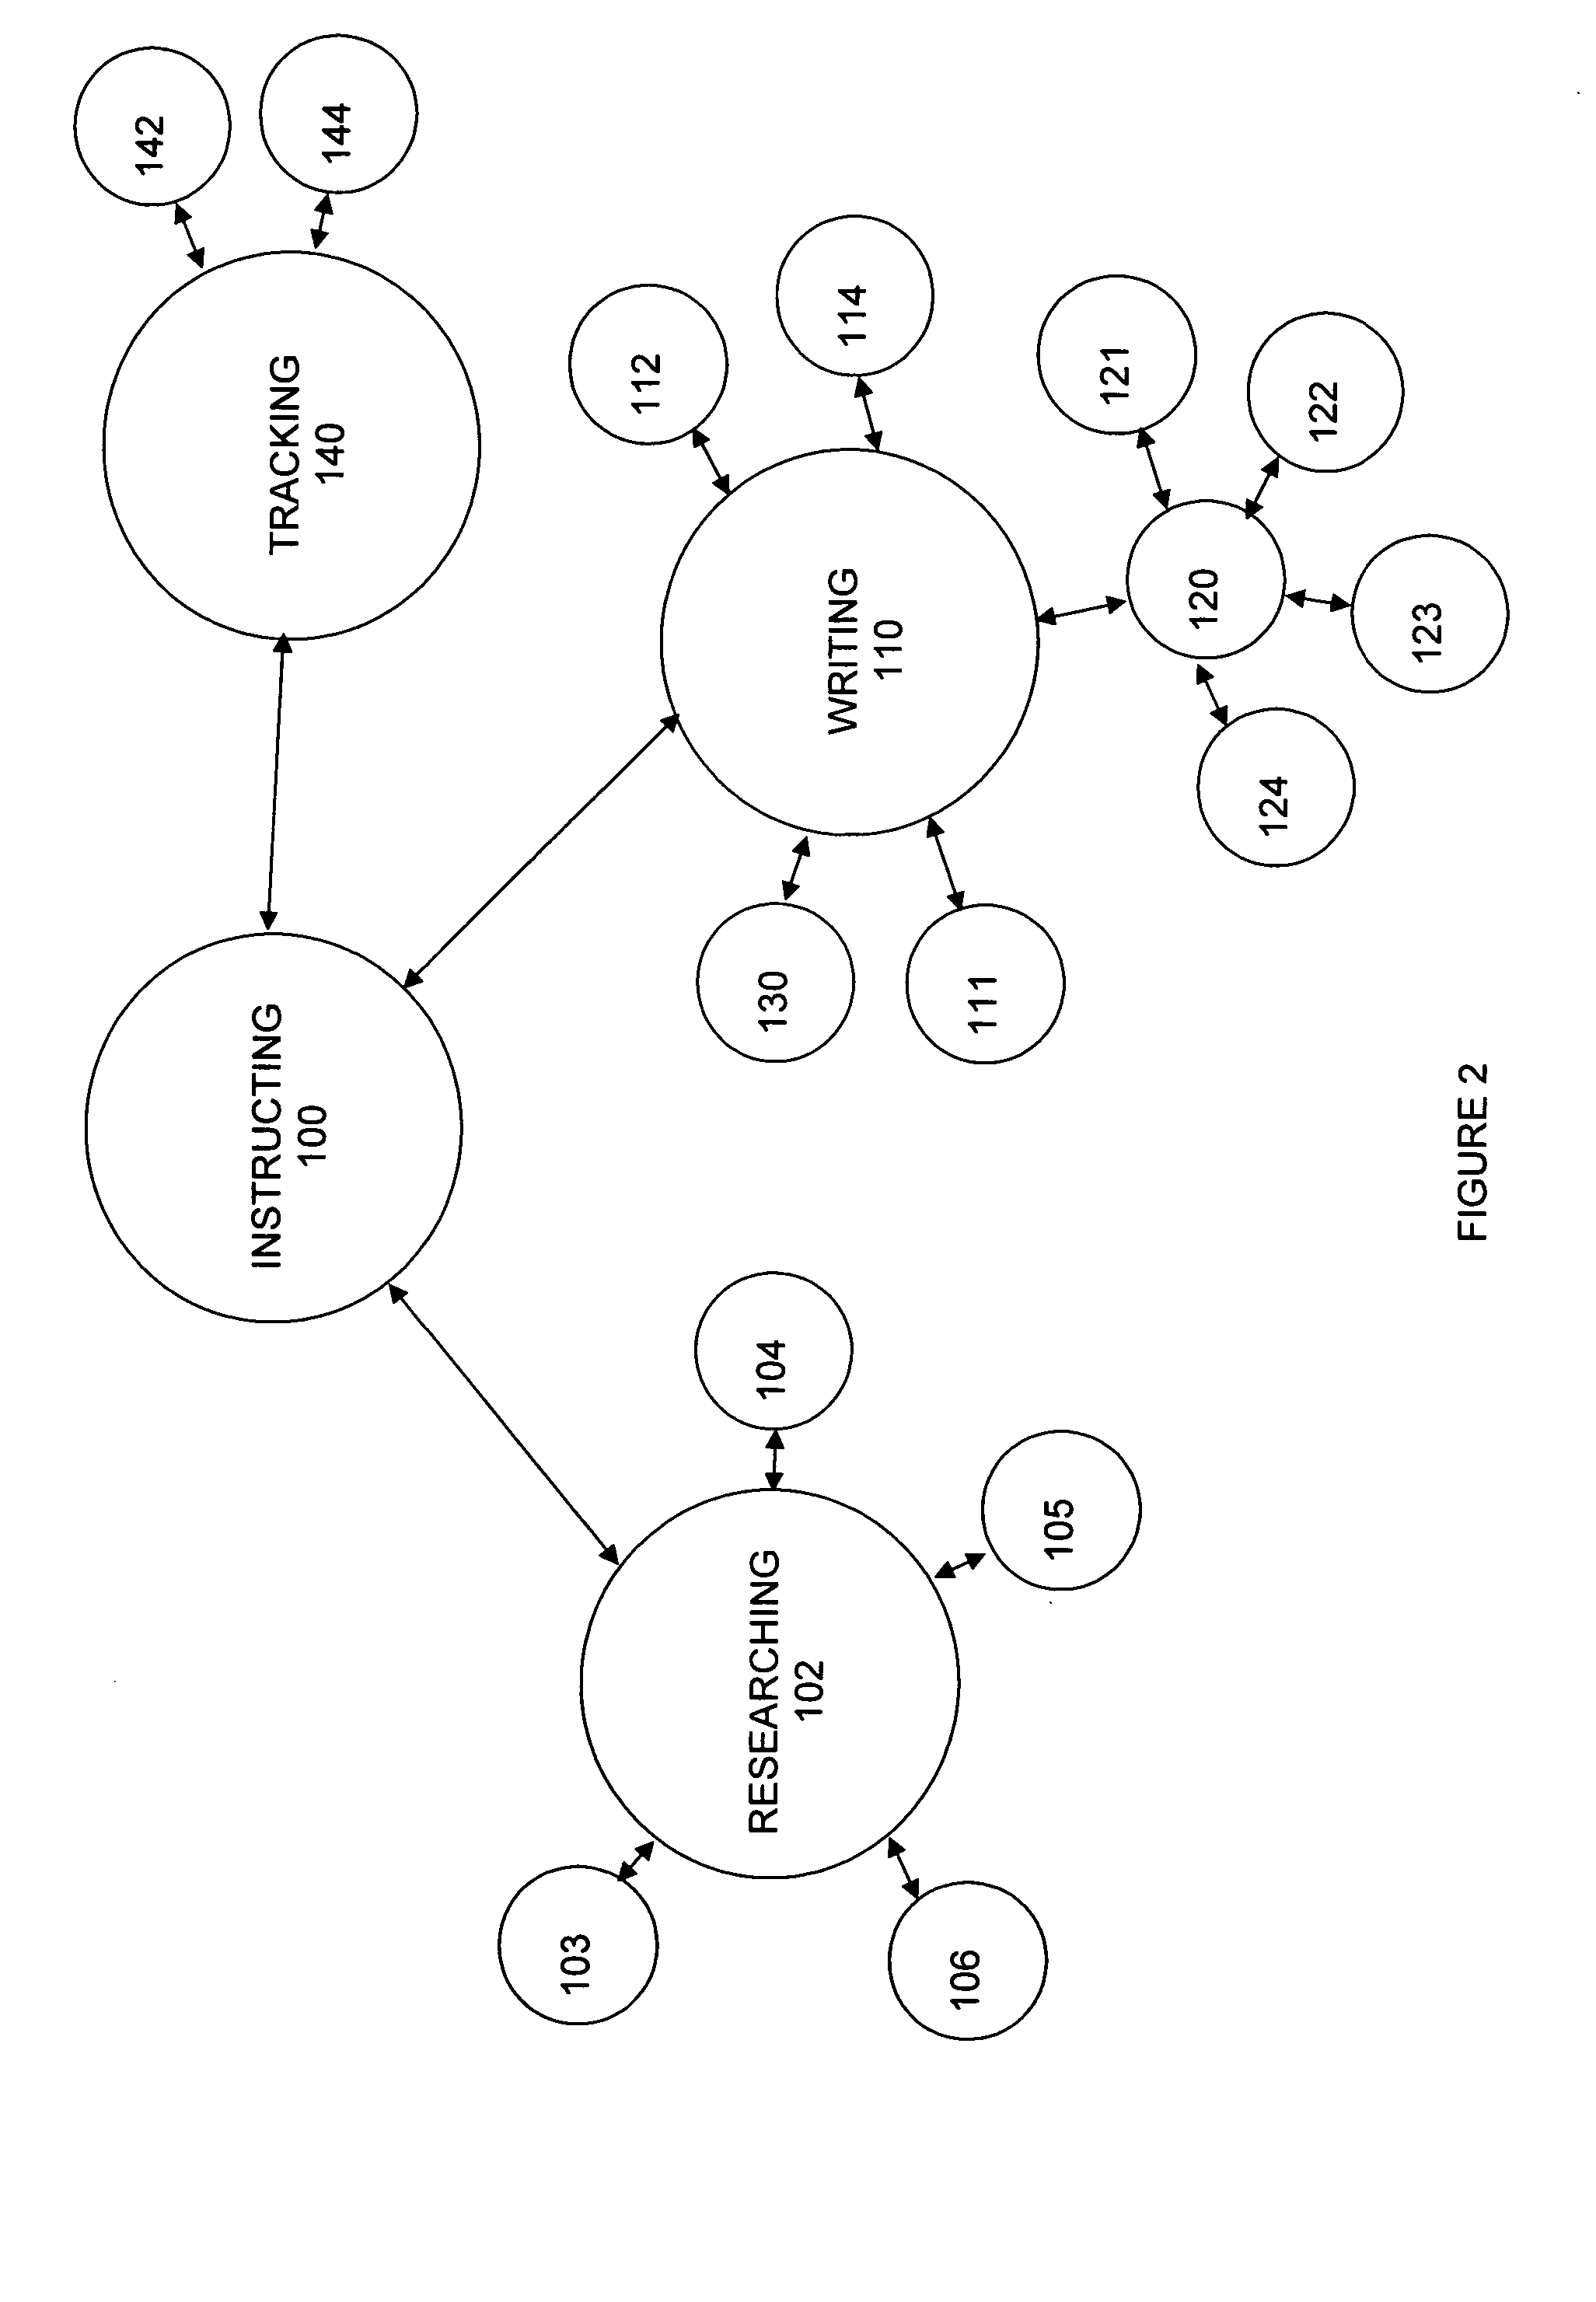 Method and apparatus for completing a research and writing project